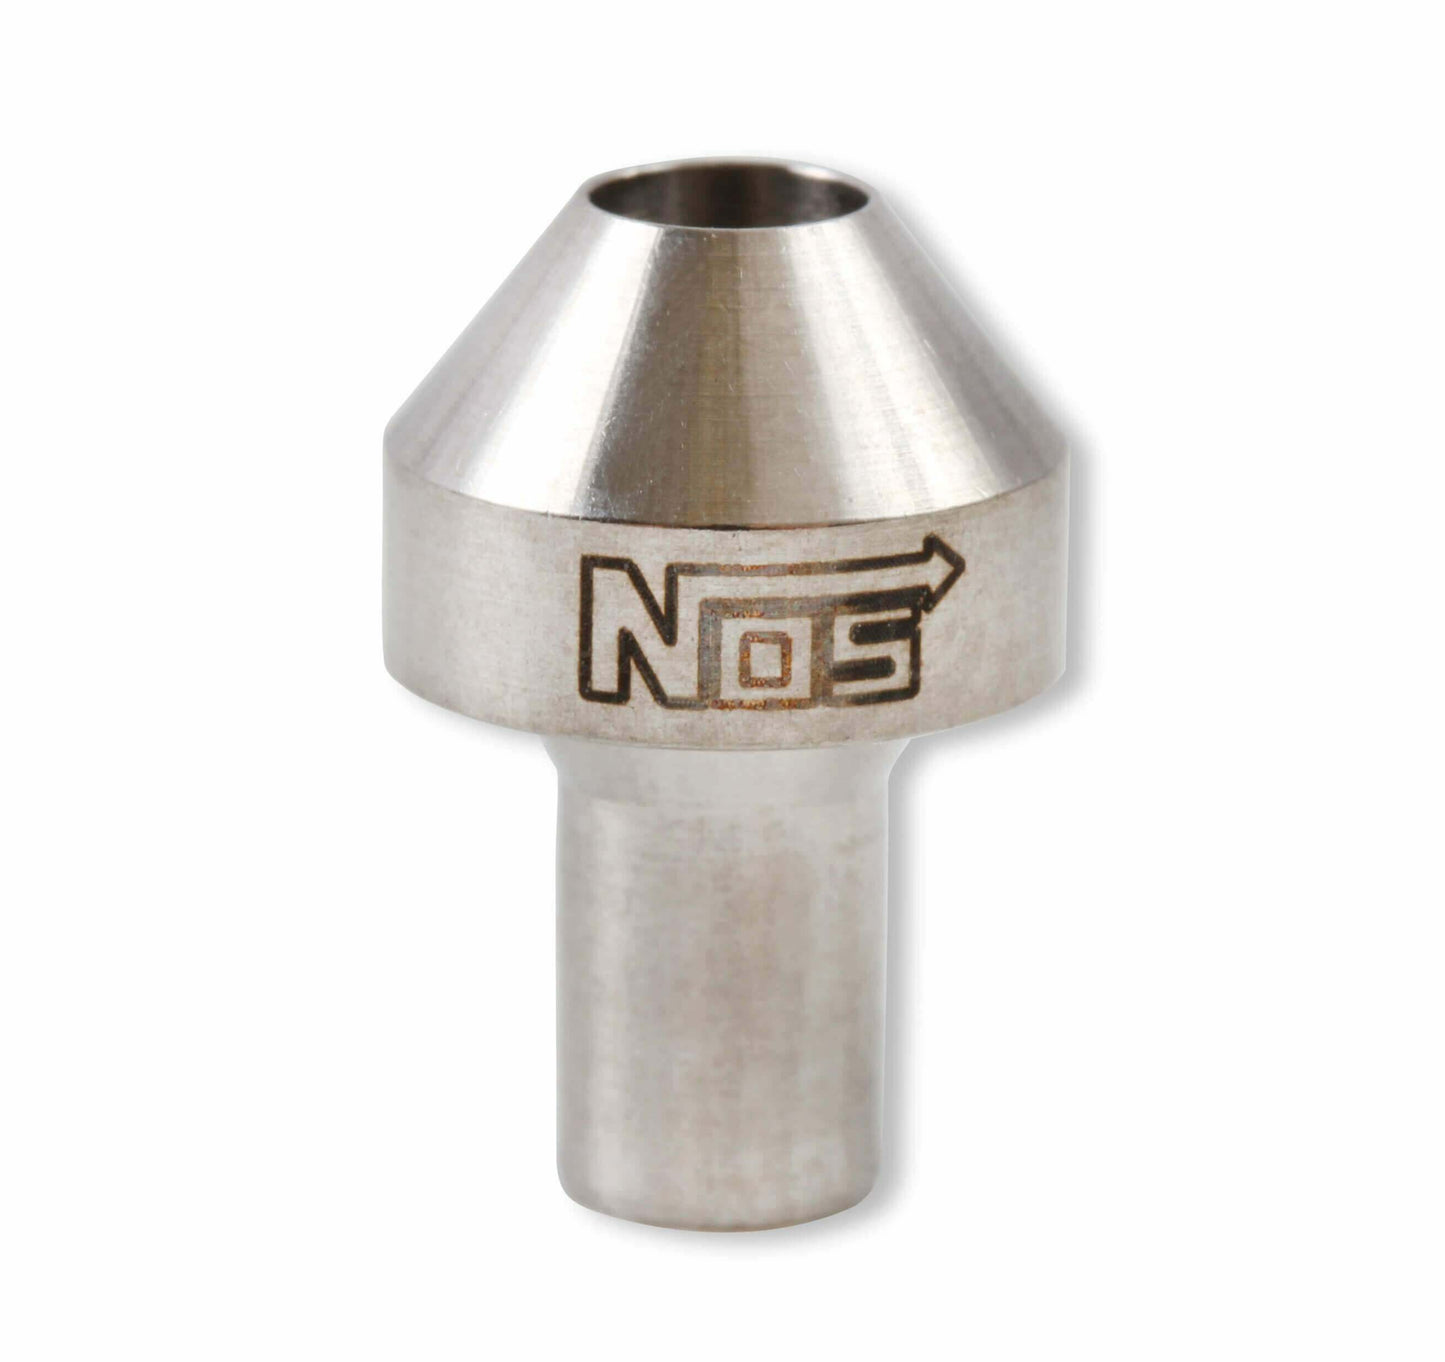 NOS Precision SS Stainless Steel Nitrous Flare Jet .040 8 pack - 13760-40-8NOS